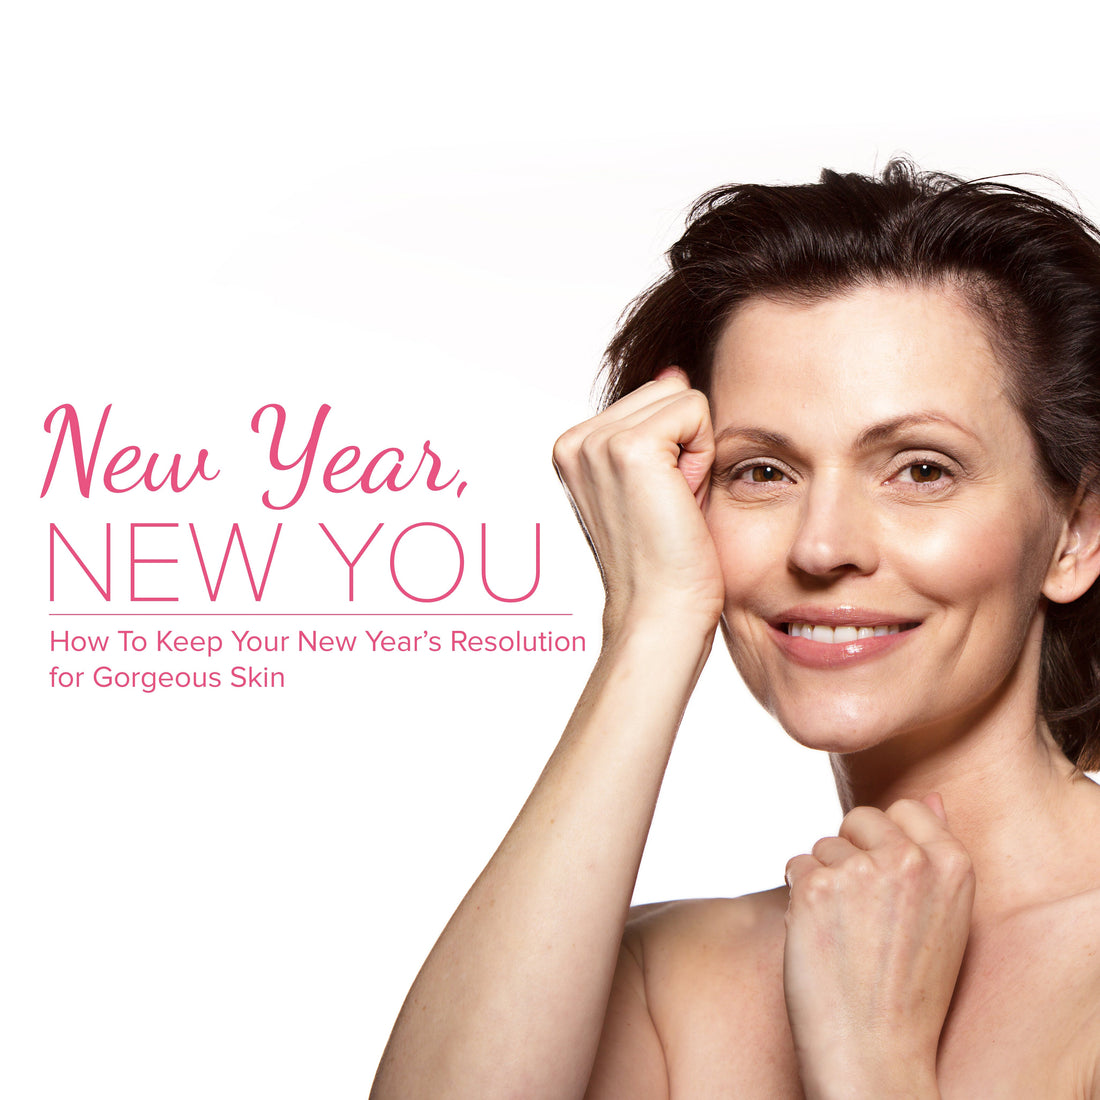 New Year New You: How To Keep Your New Year's Resolution for Gorgeous Skin